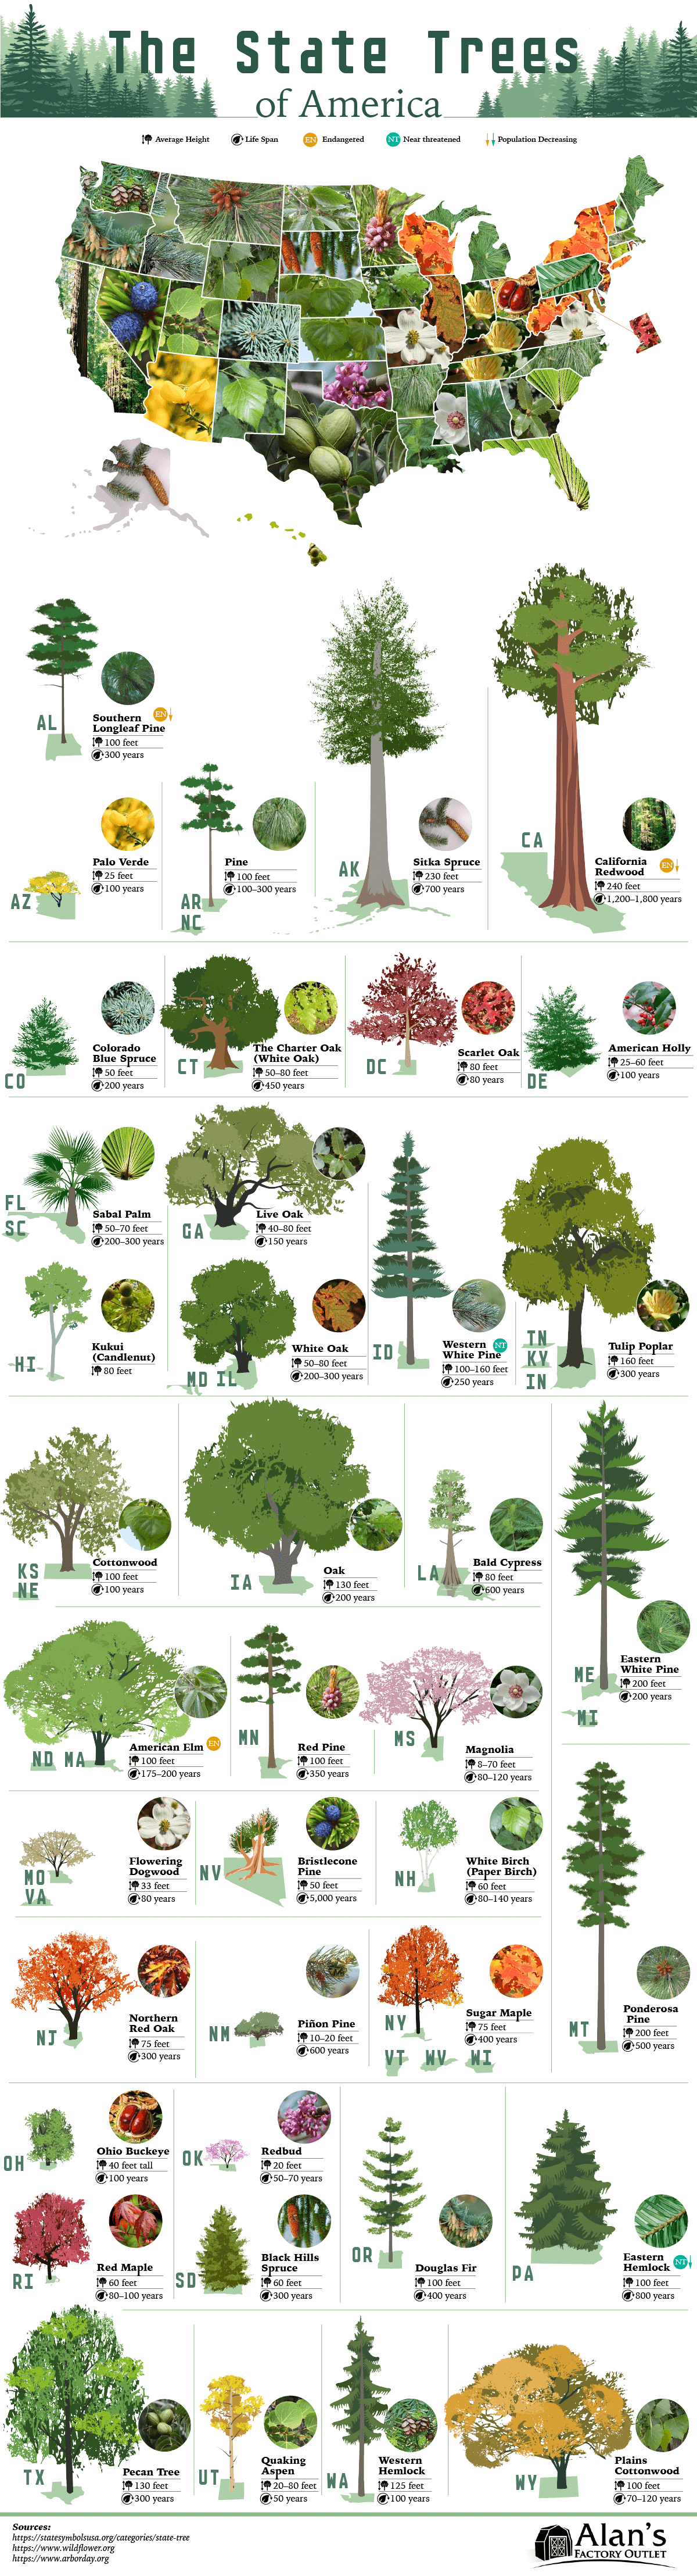 The State Trees of America